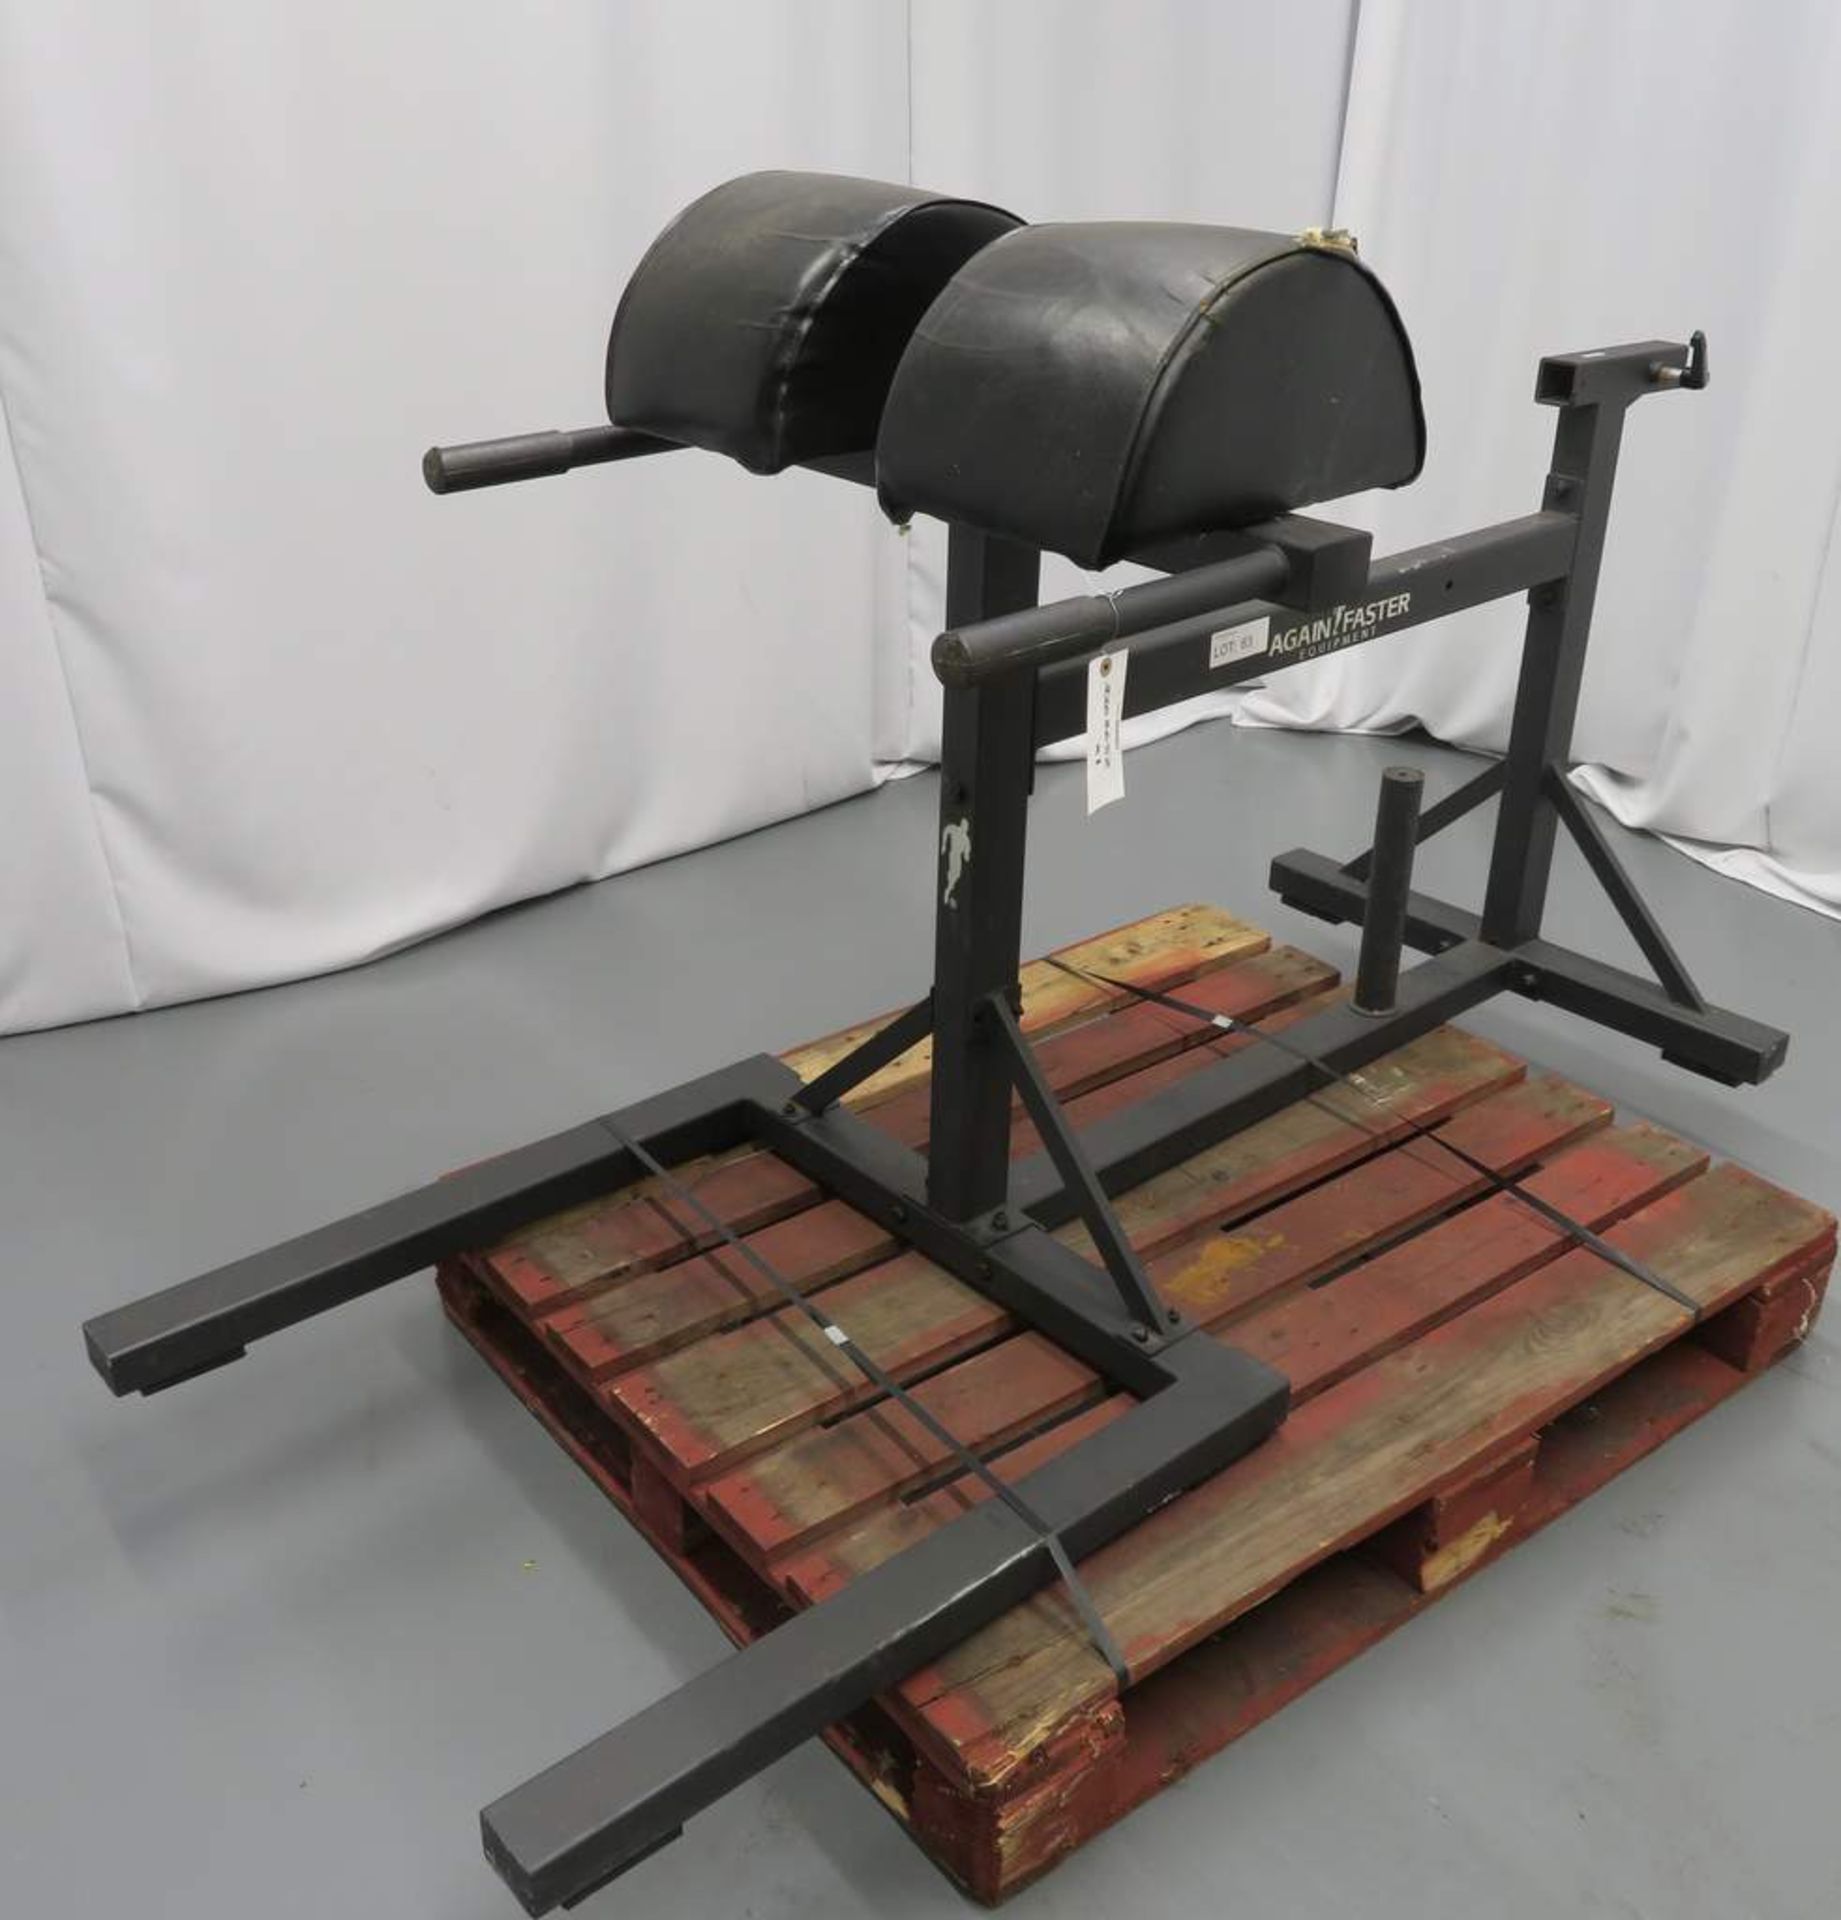 Again Faster Equipment Multi Function Sit Up Station - Missing Leg Support Bar. - Image 2 of 4